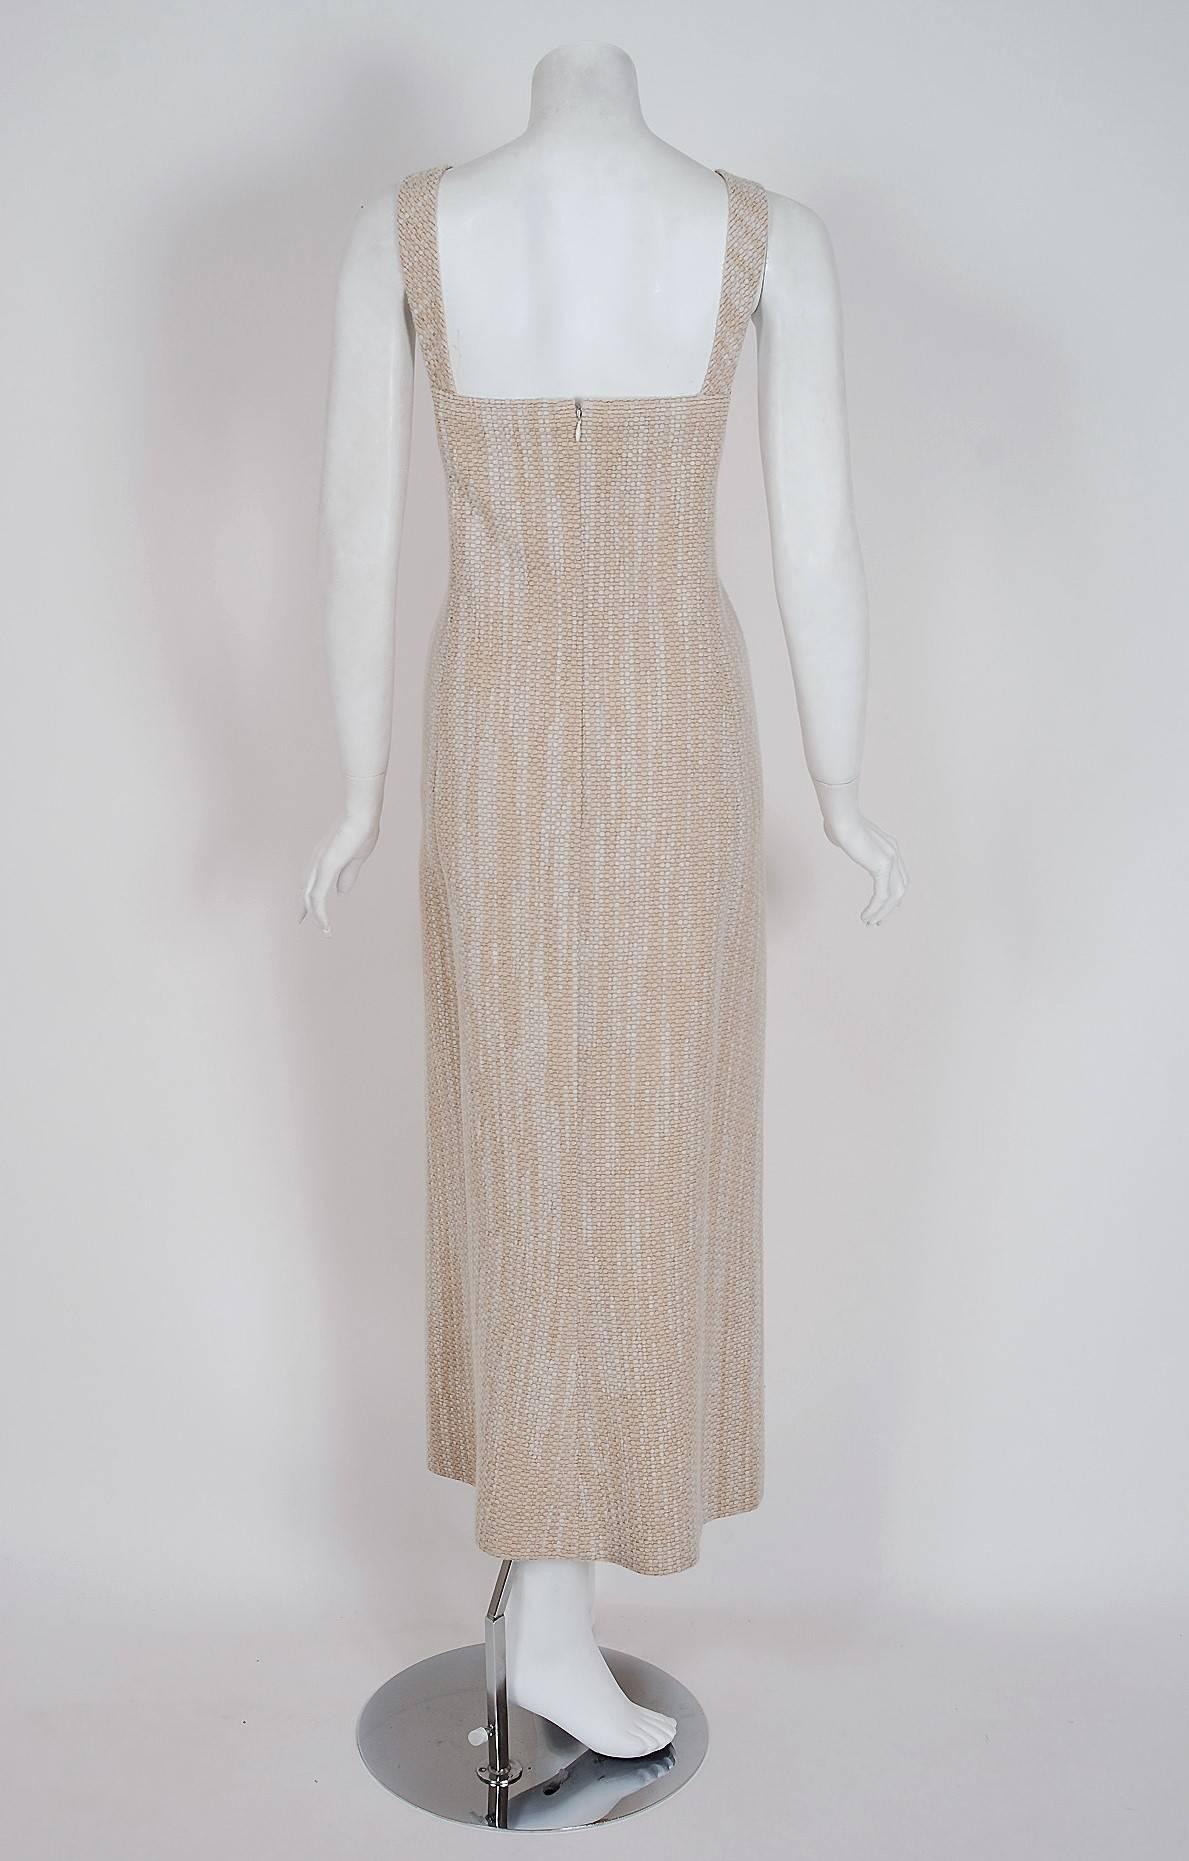 1991 Chanel Beige & Ivory Sequin Textured Wool Sleeveless Dress Gown & Shawl 3